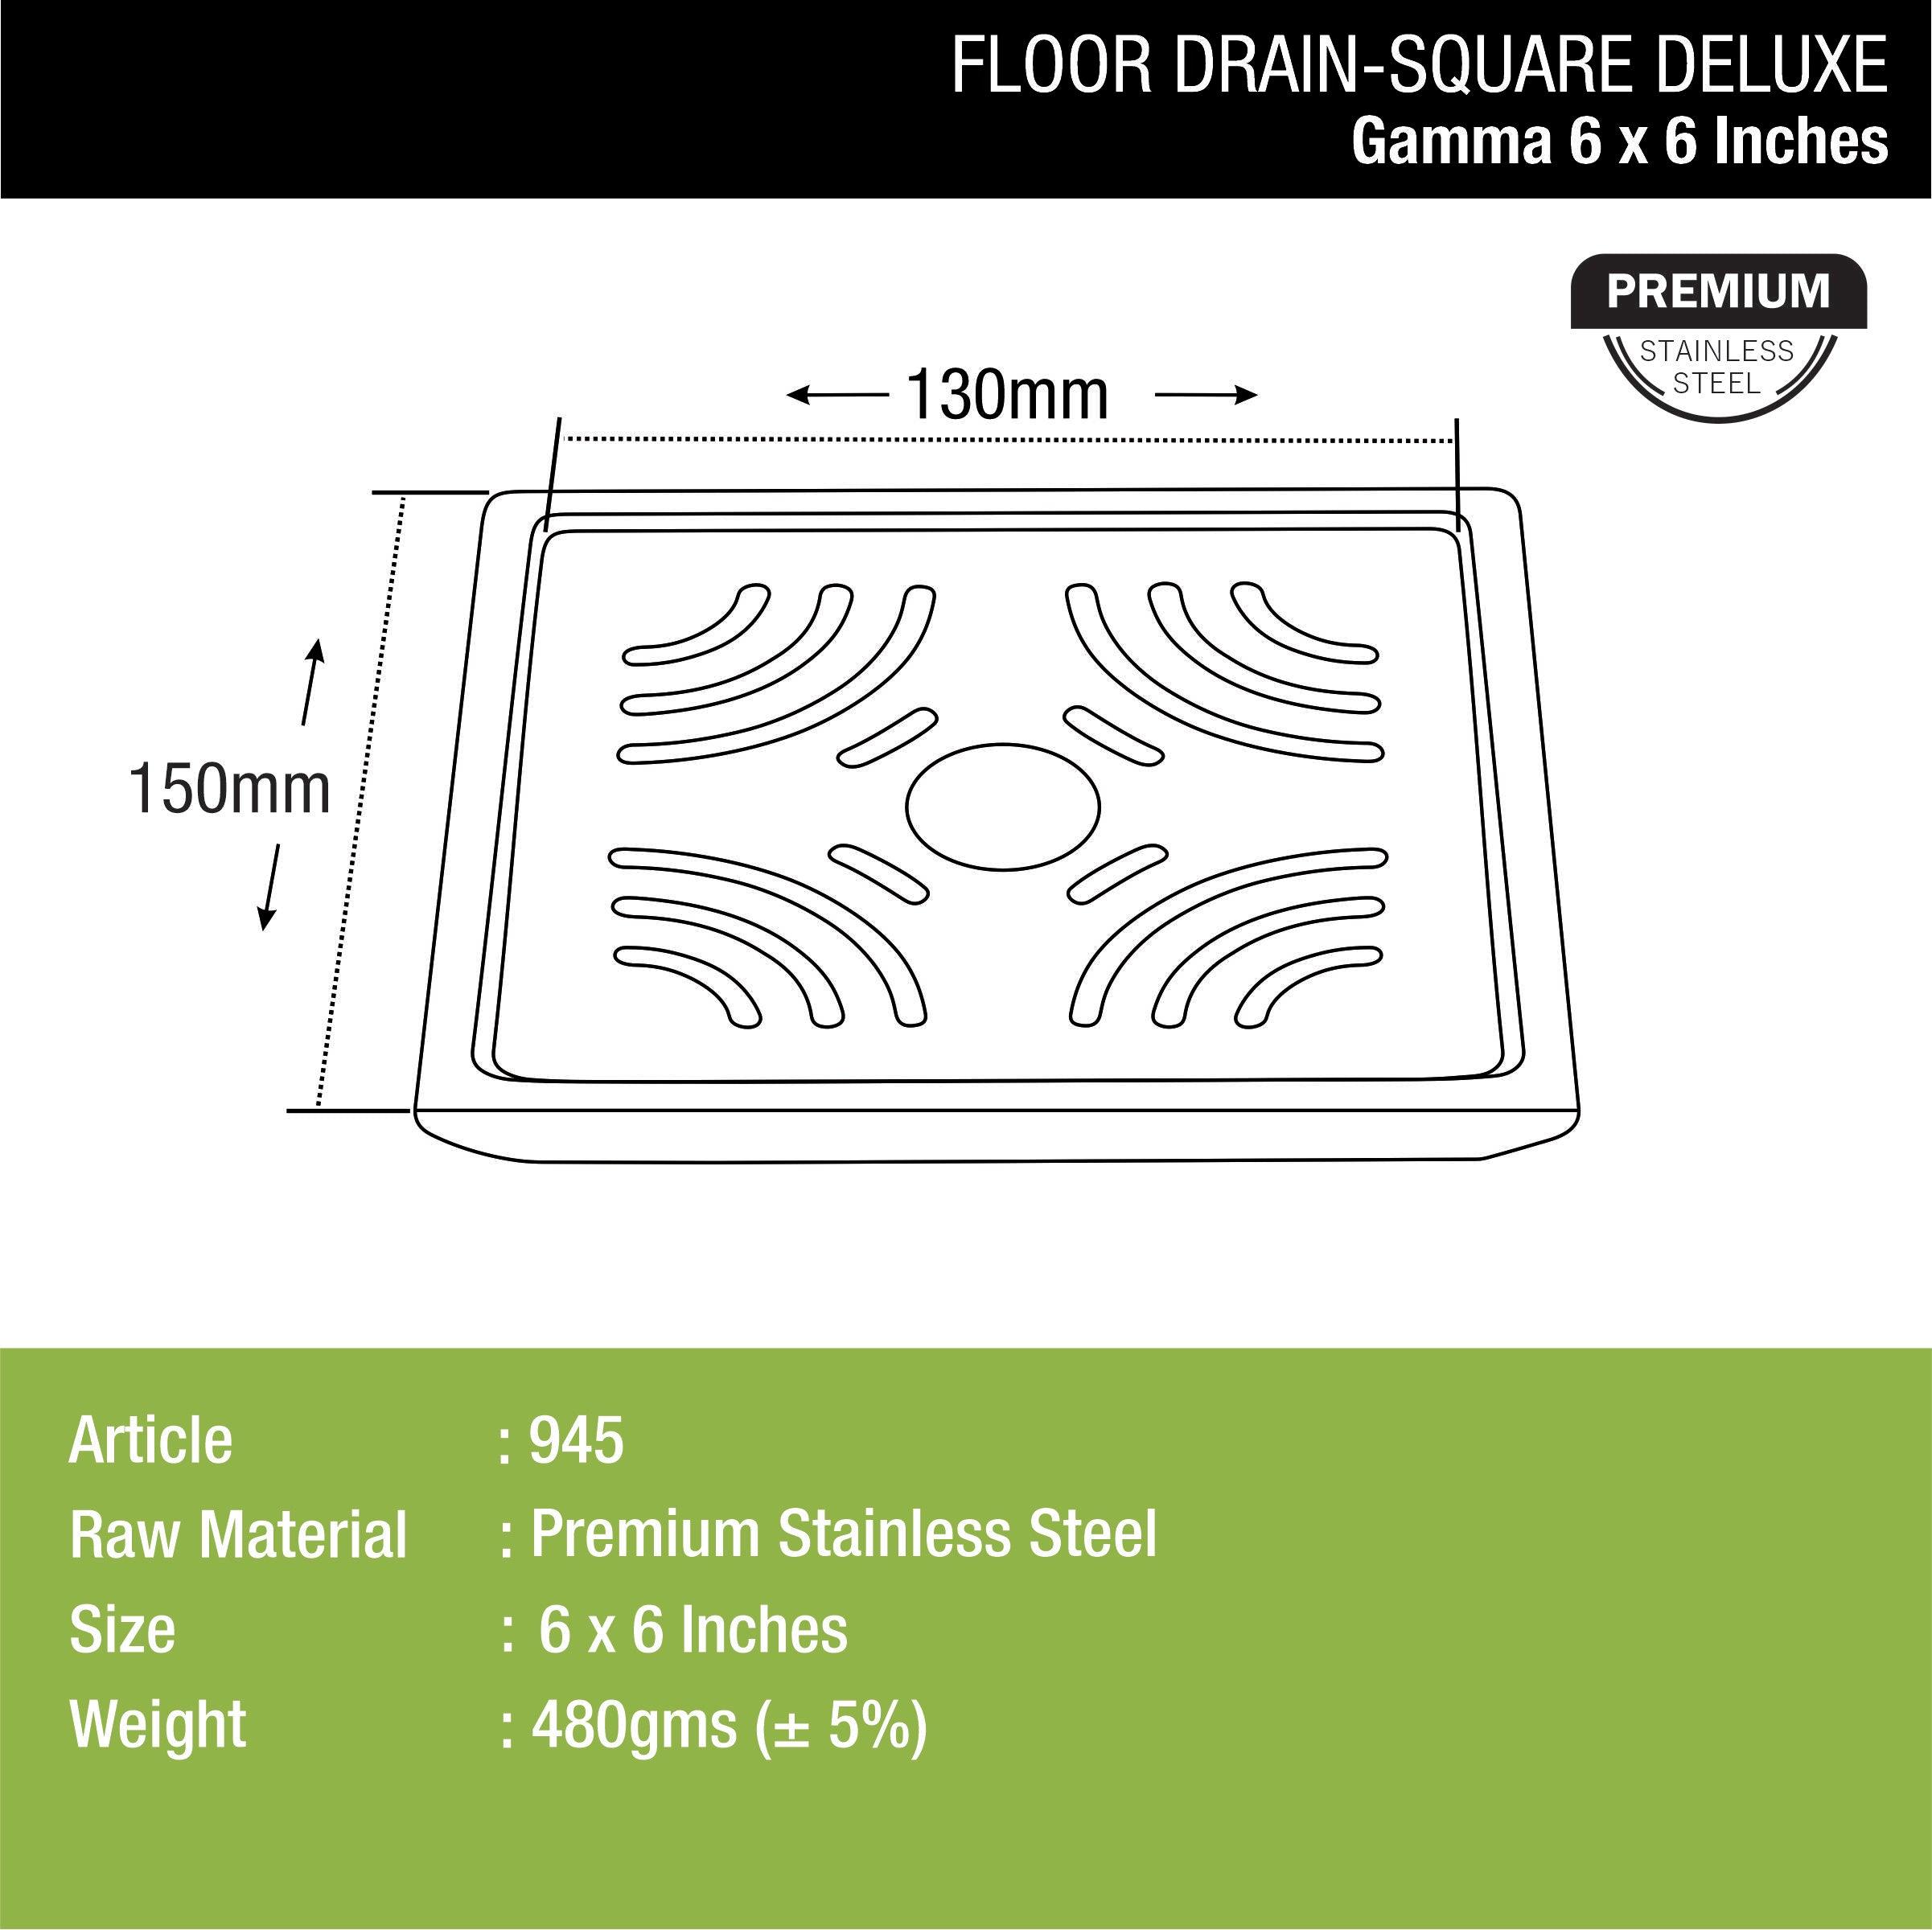 Gamma Deluxe Square Floor Drain (6 x 6 Inches) with Hole dimensions and sizes